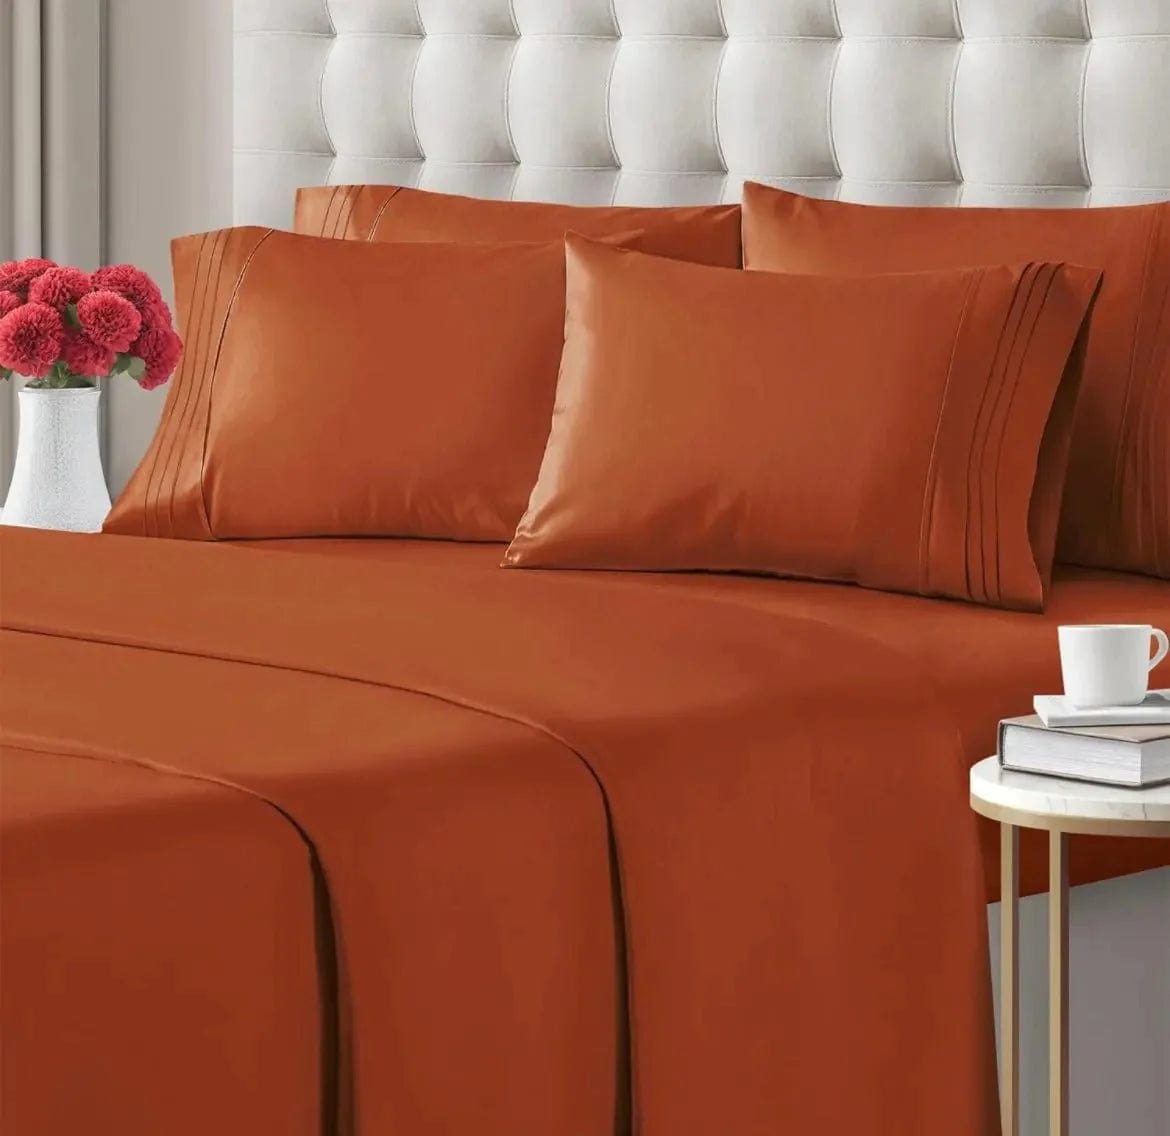 Linen World Bed Sheets Orange / King “Winston” 800 Collection 6 pc Deep Pocket Sheet Set in All Sizes